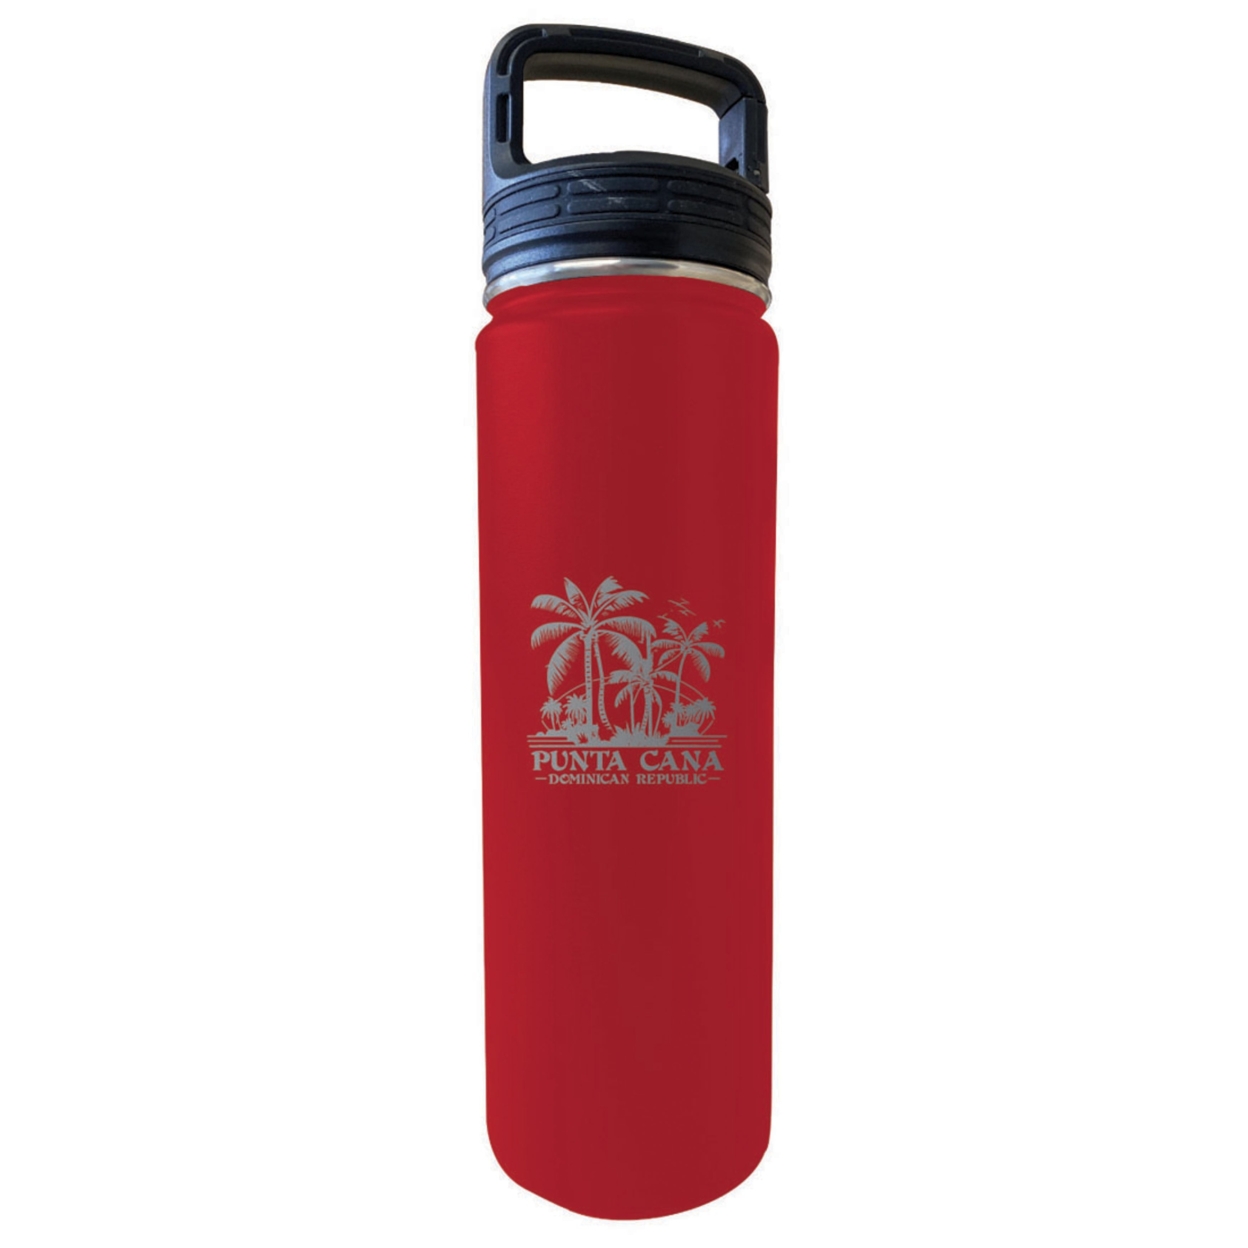 Punta Cana Dominican Republic Souvenir 32 Oz Insulated Stainless Steel Tumbler - Red, Parrot 2